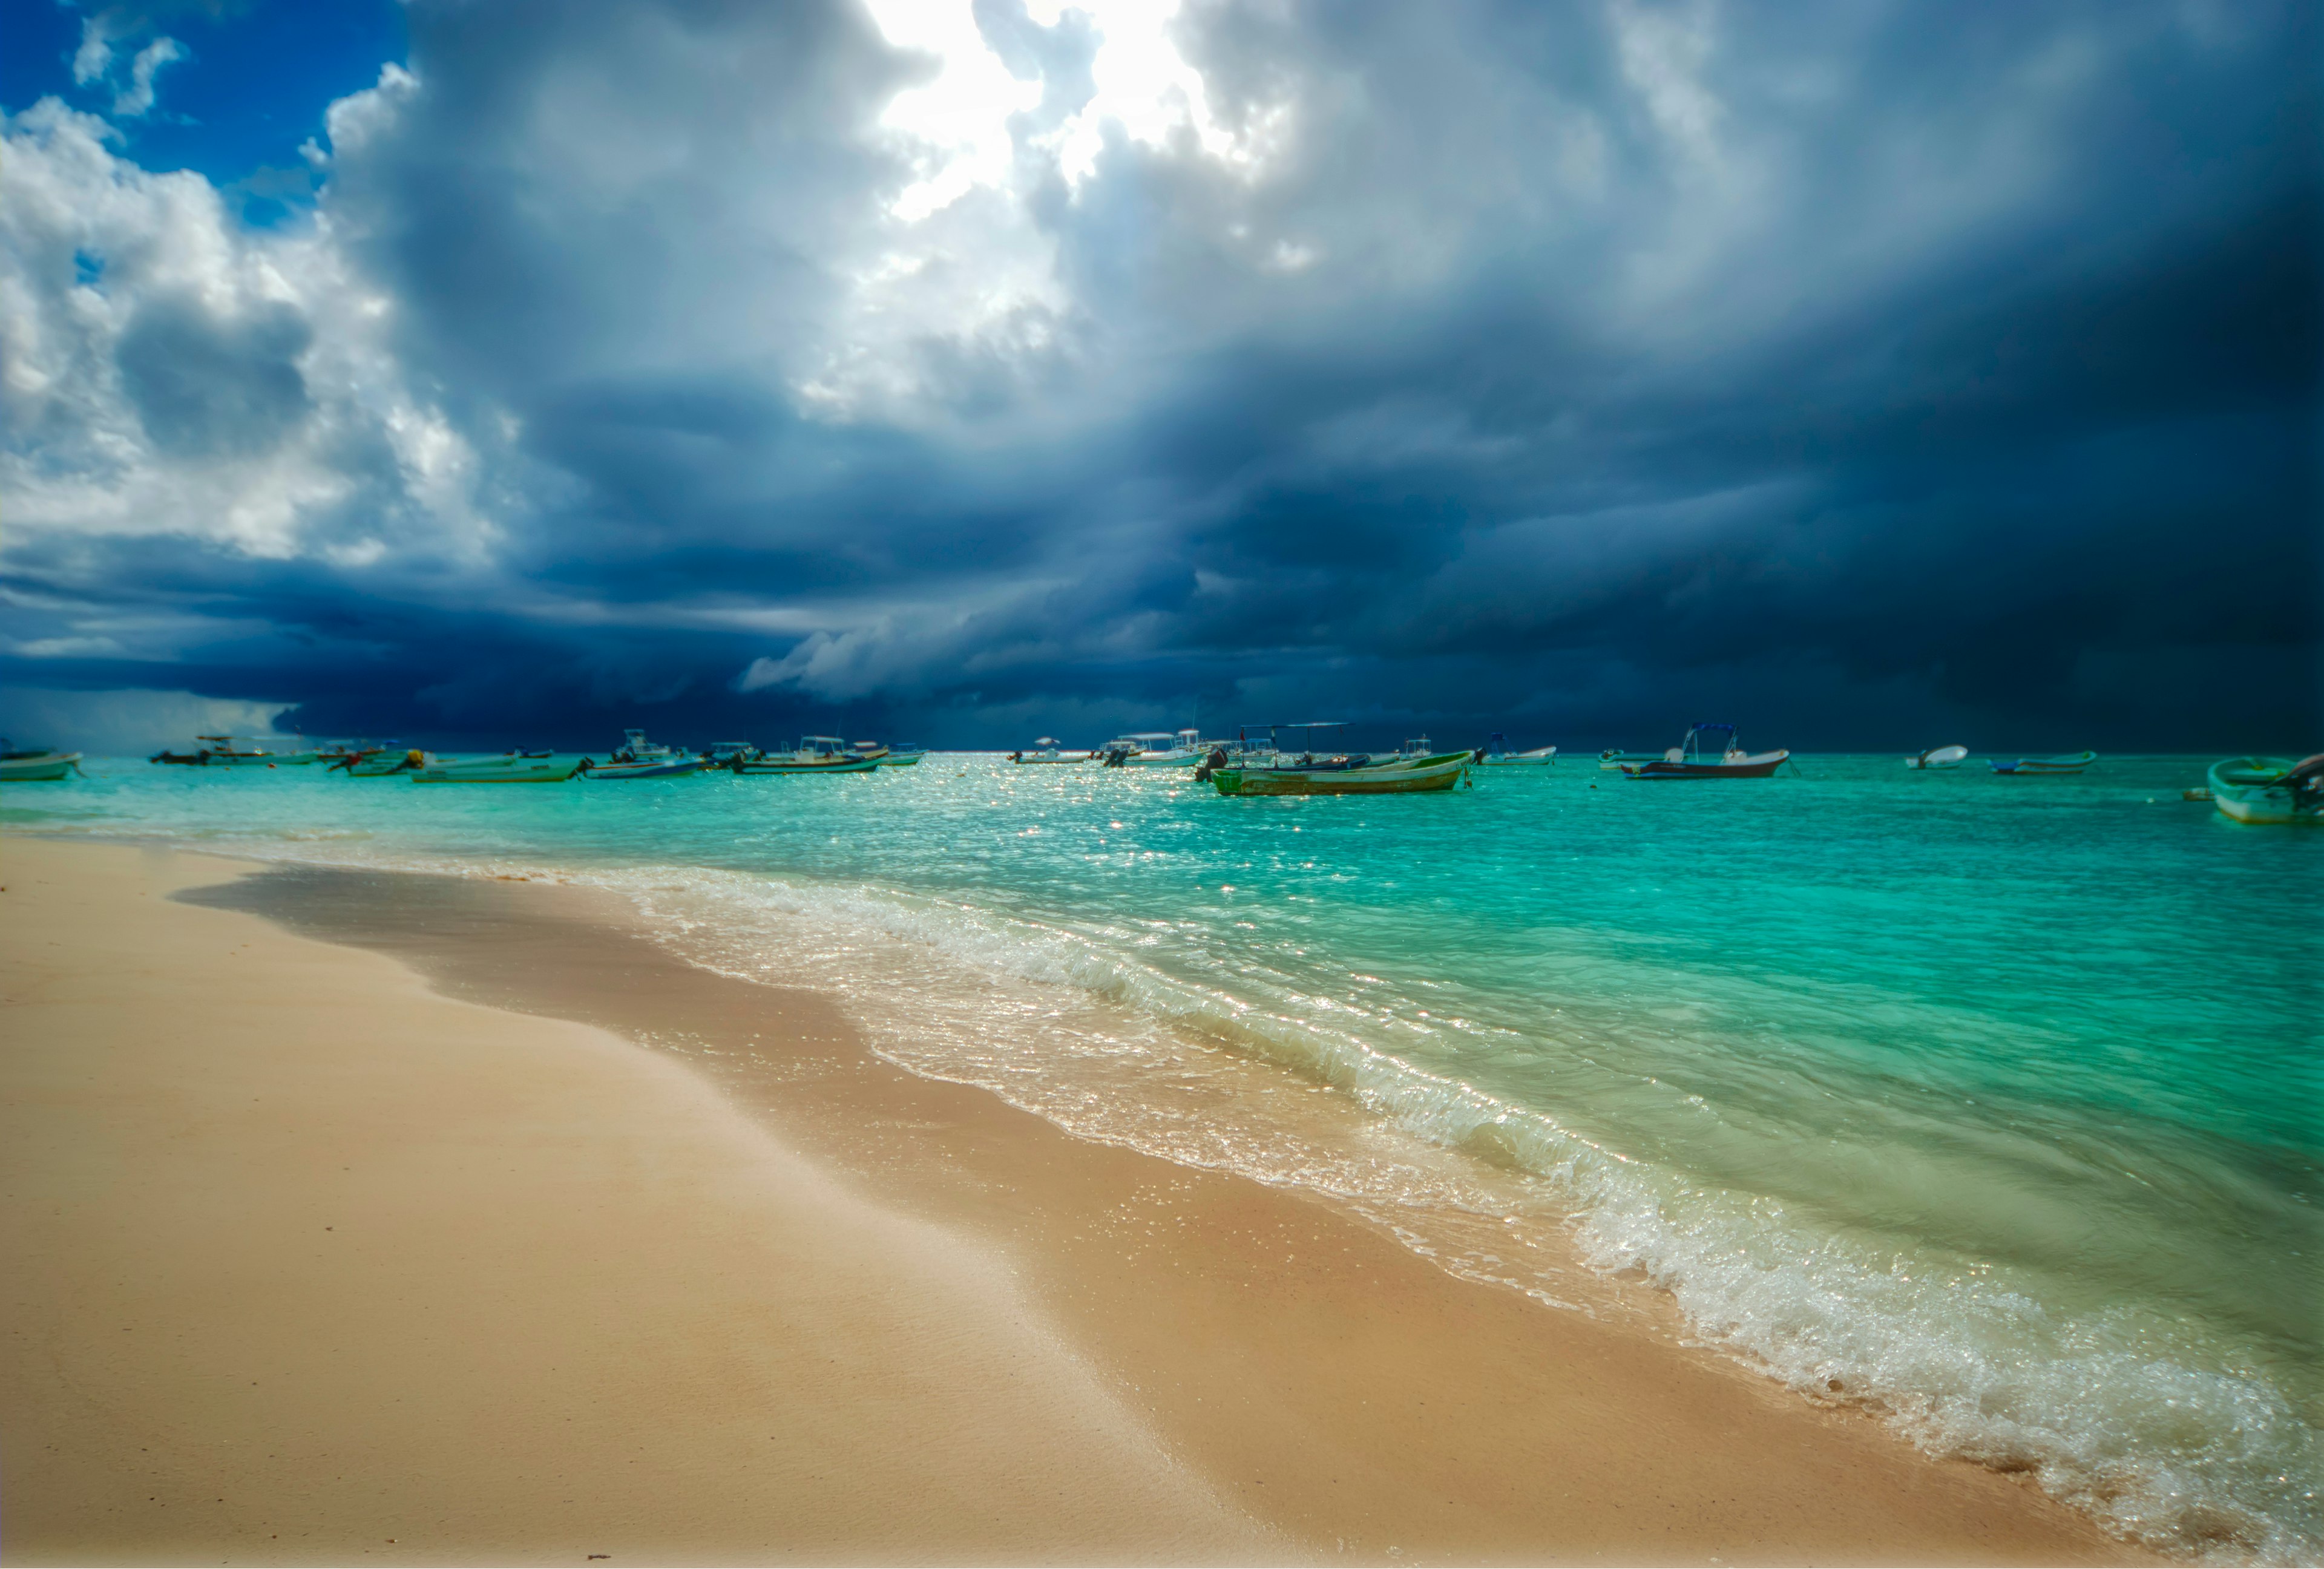 Storm and rain coming to the Caribbean sea of Playa del Carmen Mexico. Fishing boats anchored near the beach; Shutterstock ID 1589015776; your: Brian Healy; gl: 65050; netsuite: Lonely Planet Online Editorial; full: Best time to visit Playa del Carmen